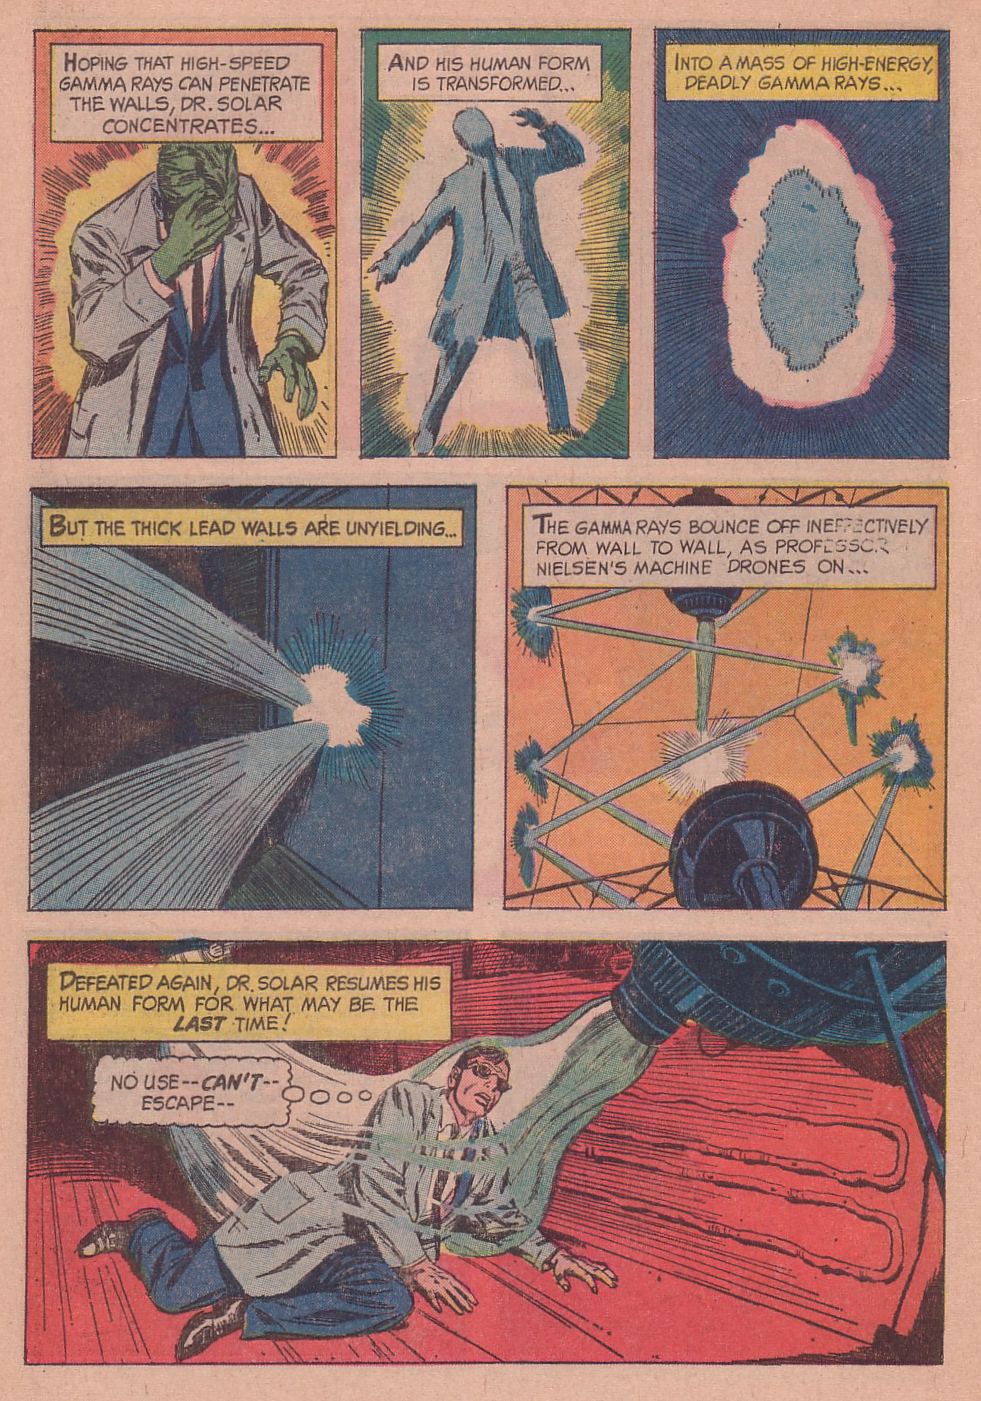 Doctor Solar, Man of the Atom (1962) Issue #4 #4 - English 32